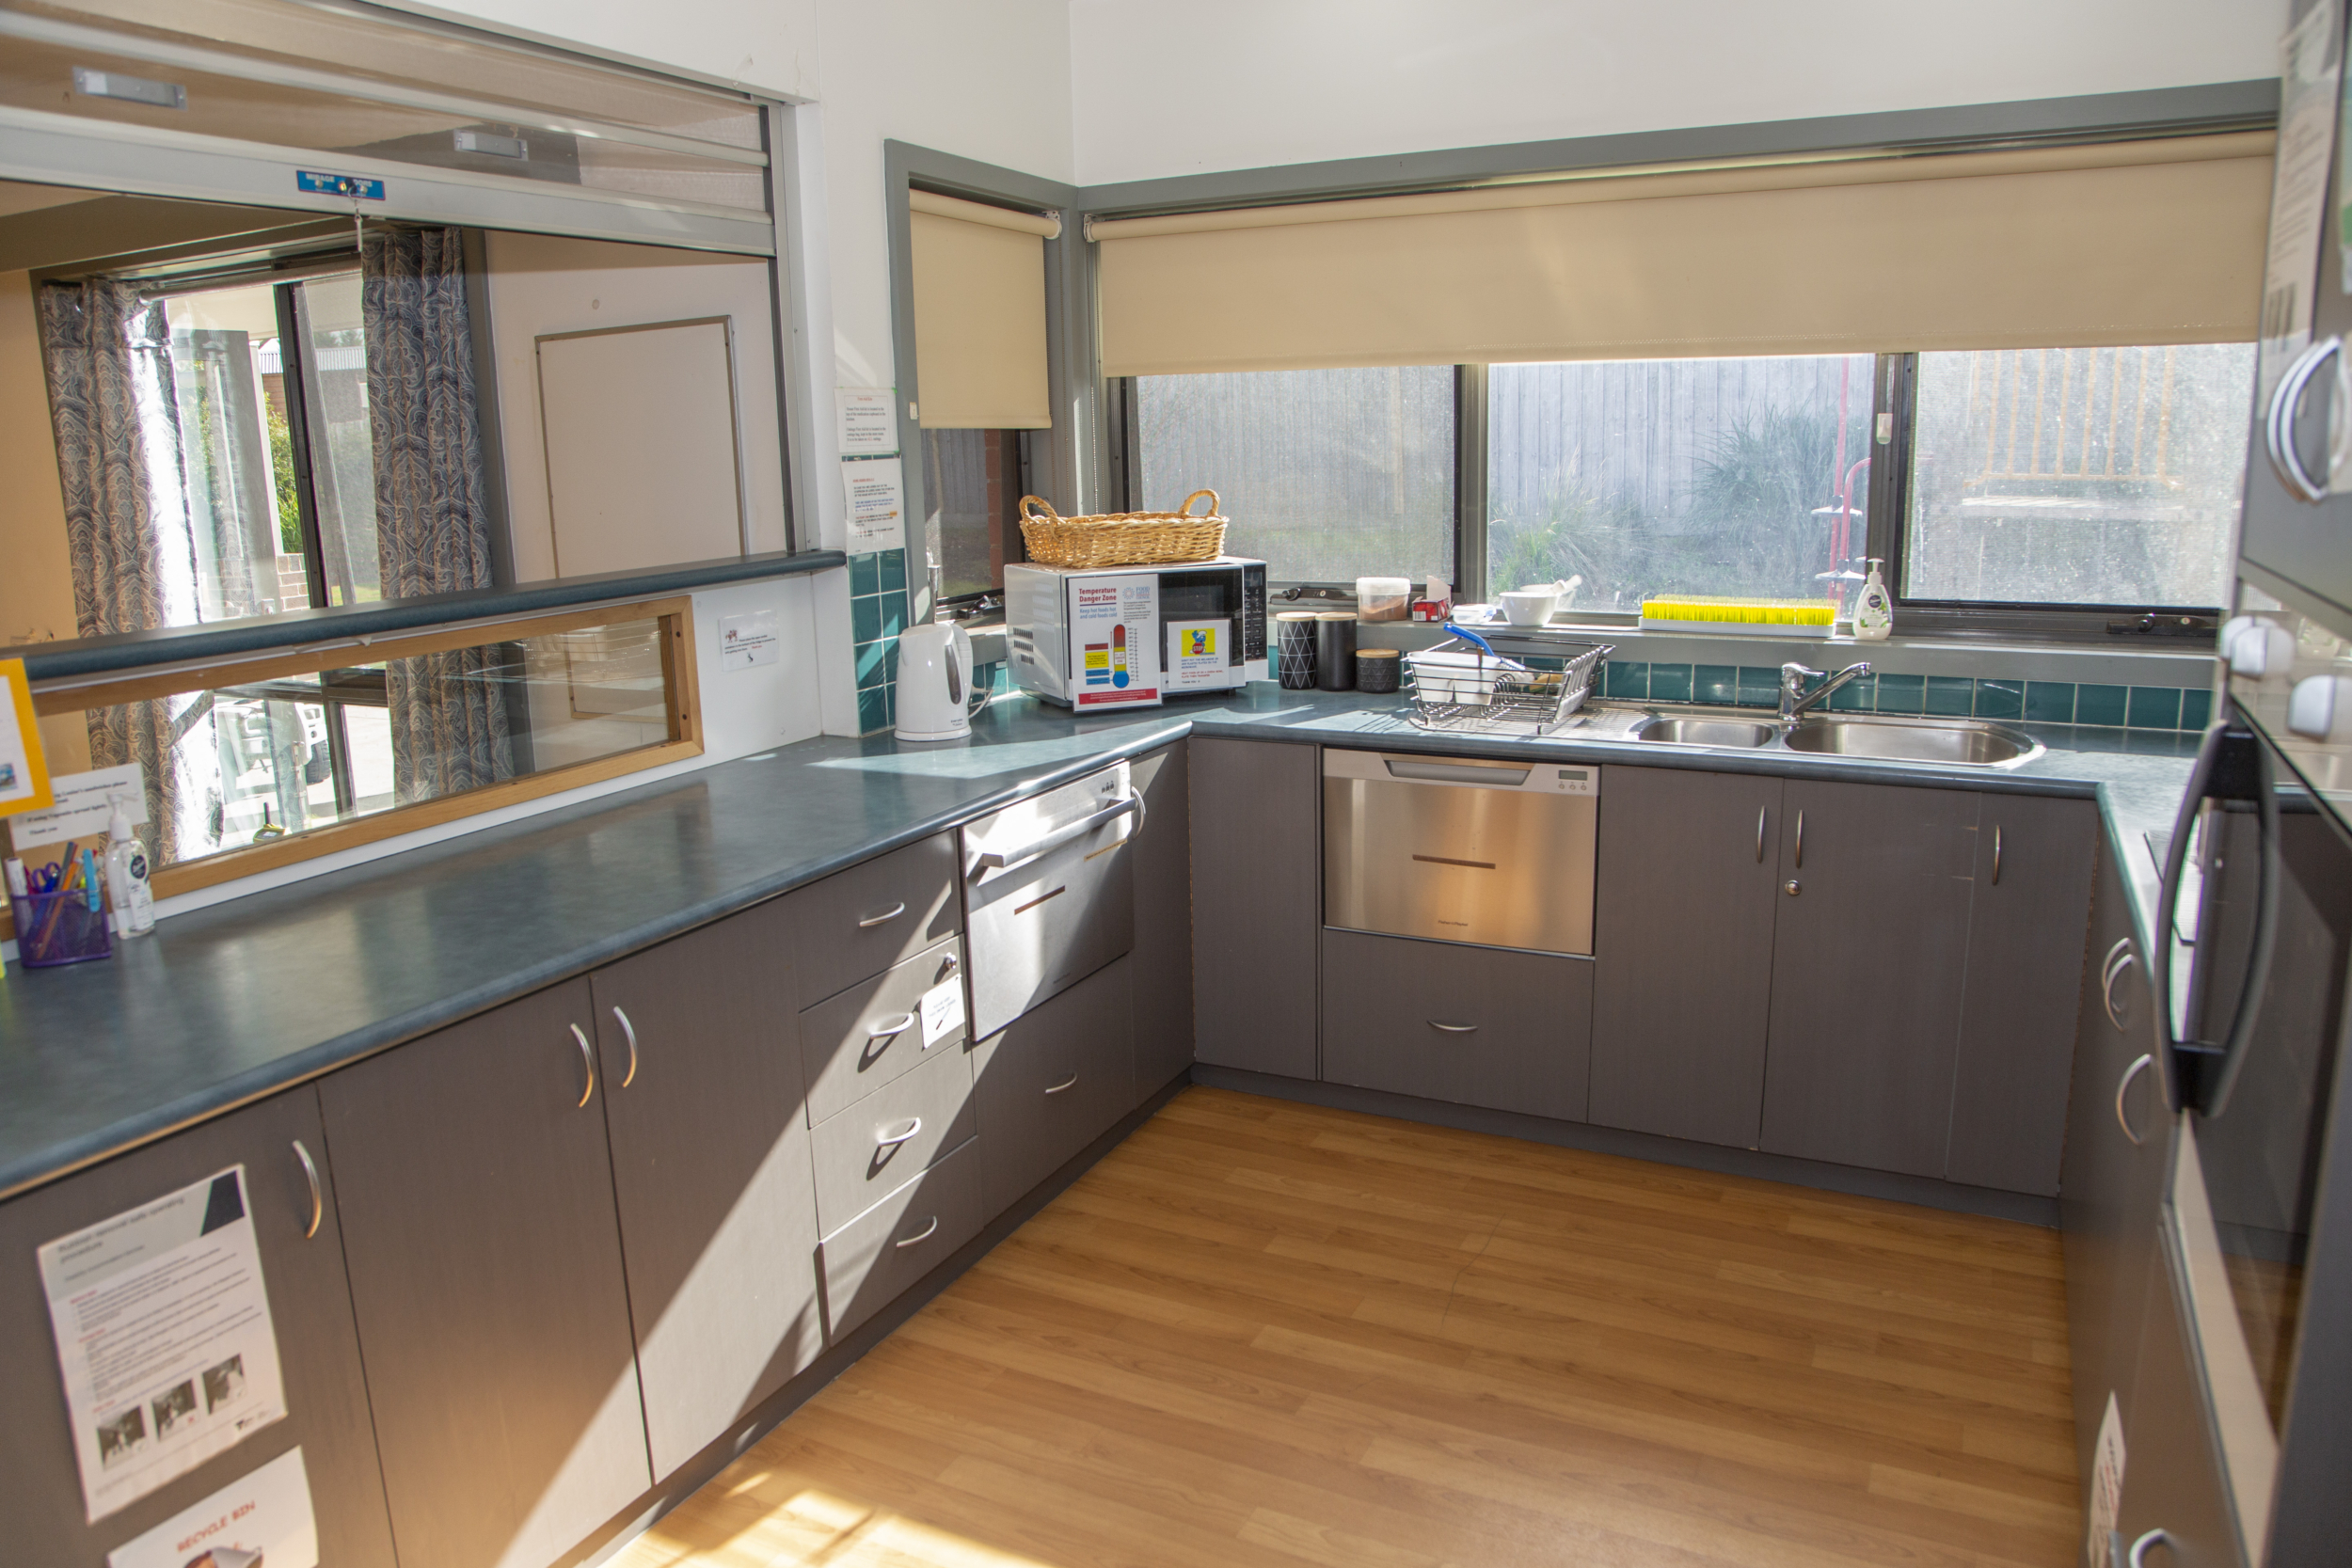 Kitchen area with grey cabinets